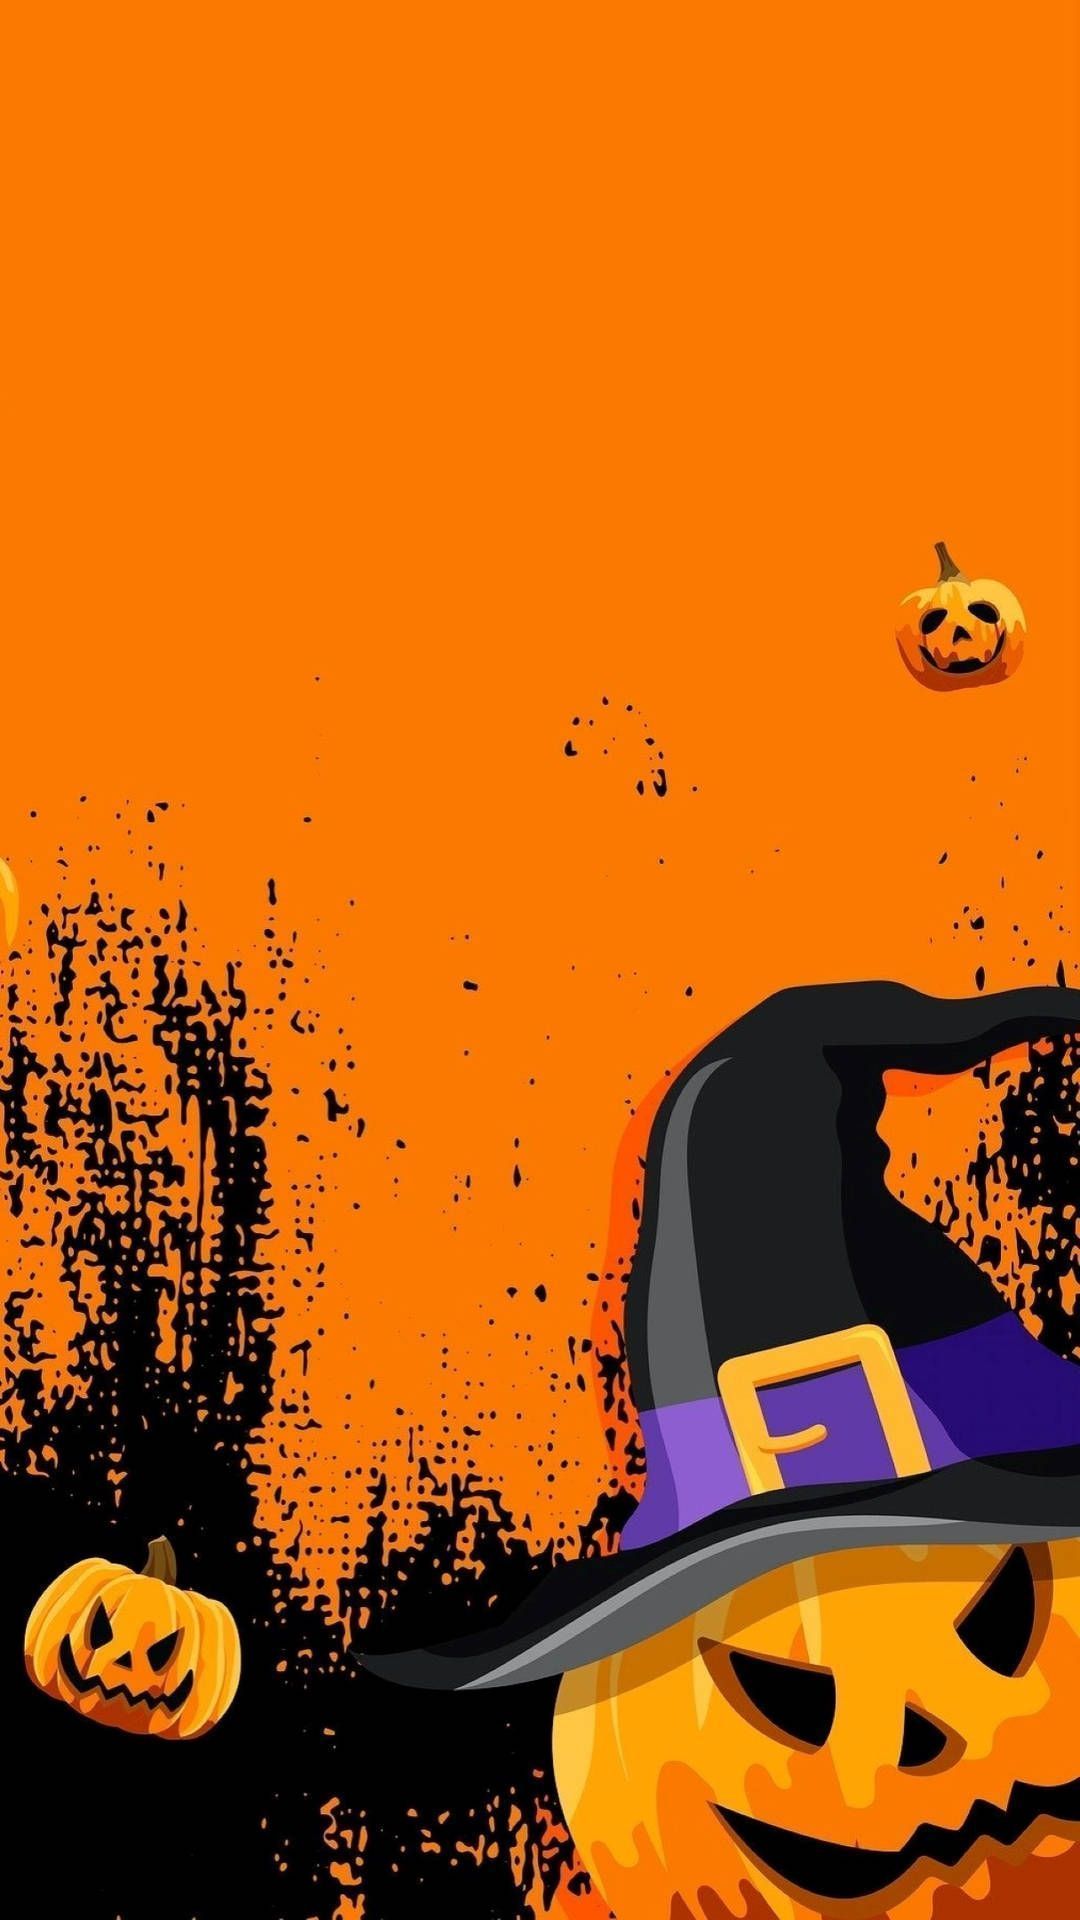 Halloween background with pumpkin and witch - Halloween, spooky